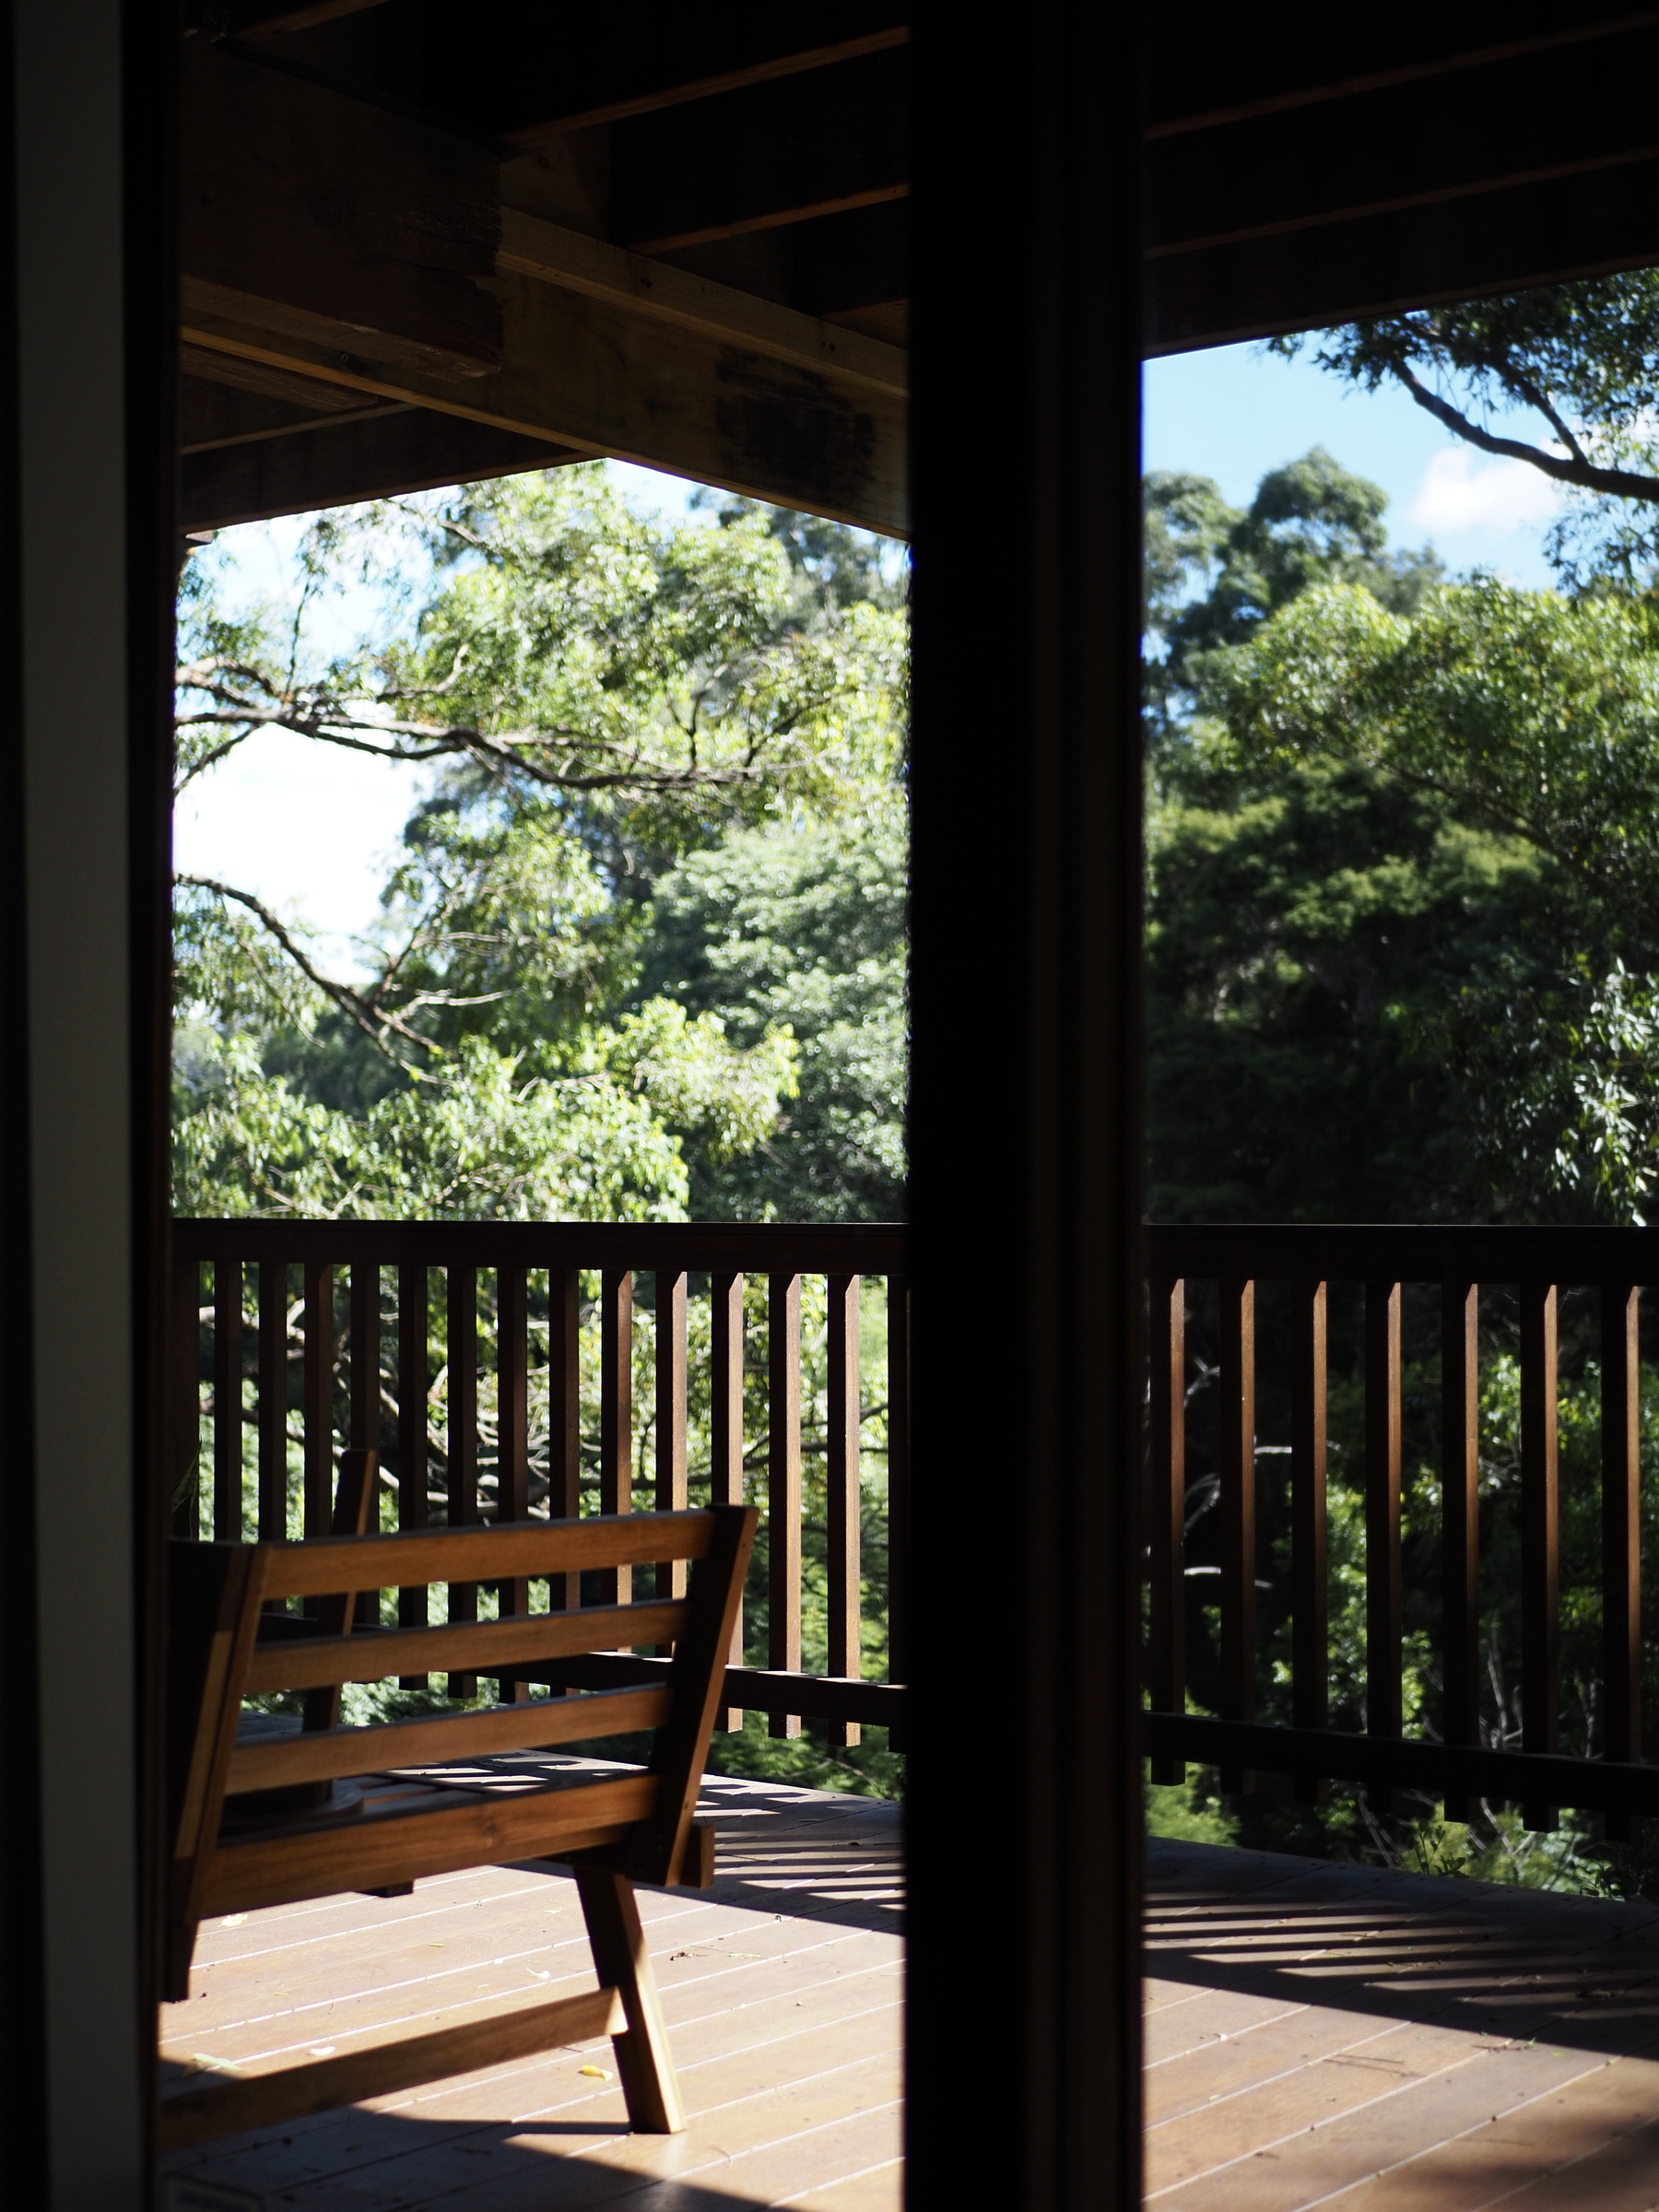 Looking through glass doors at a wooden bench and deck, with lush, green bushland in the background